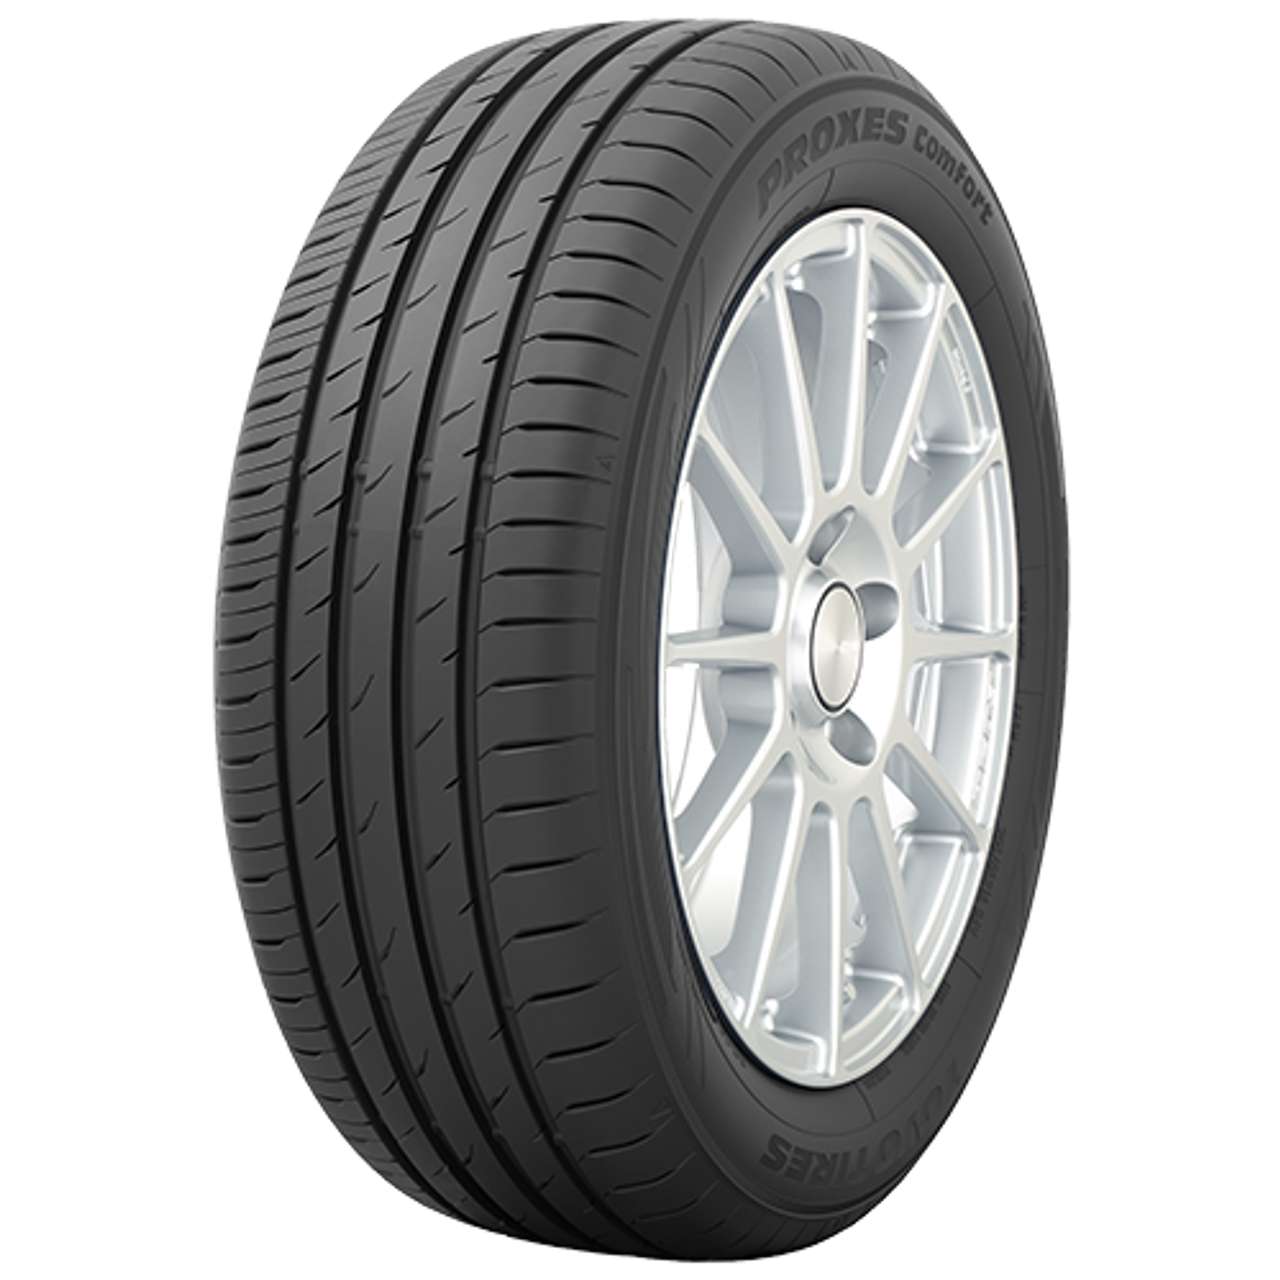 TOYO PROXES COMFORT 175/65R15 88H BSW